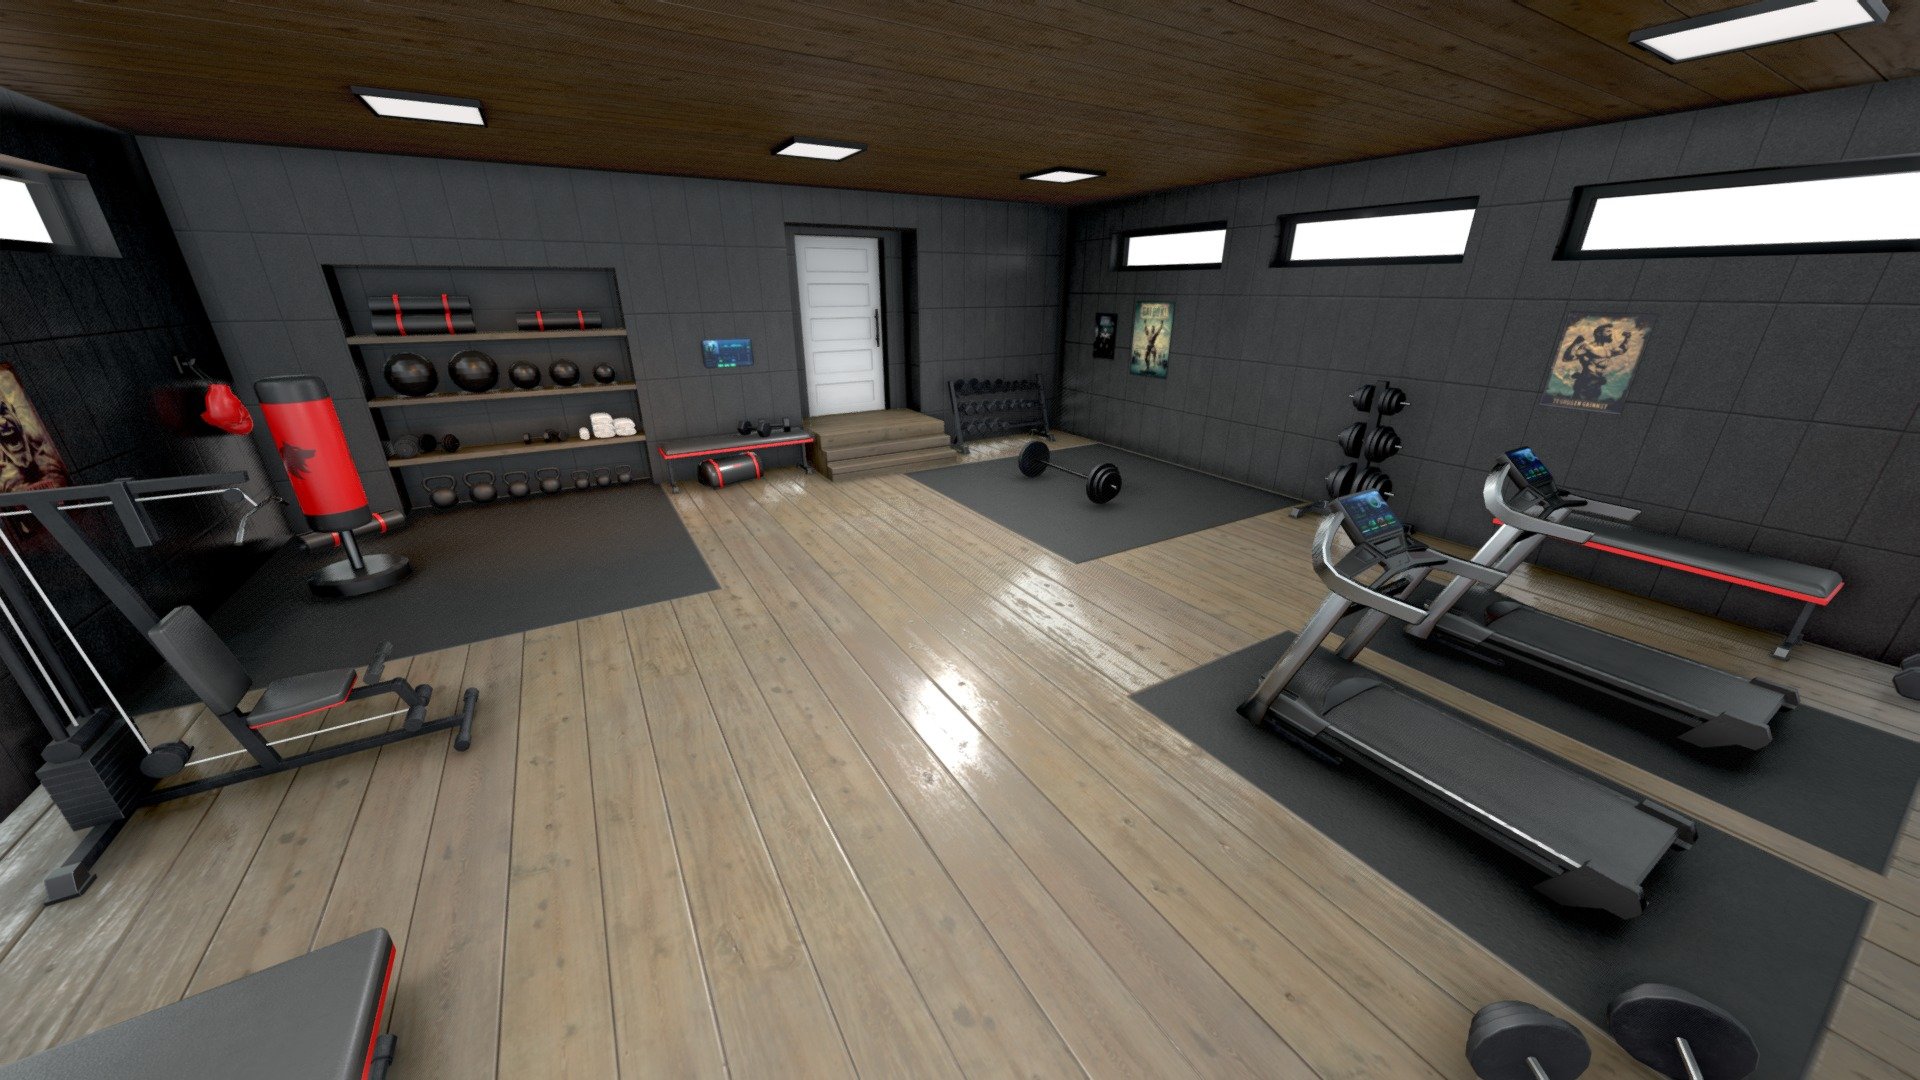 Explore a range of workout equipment, from dumbbells to a treadmill, and take your virtual workouts to new heights. Perfect for VR fitness enthusiasts seeking realistic and engaging workout environments. Elevate your fitness journey with this professionally designed VR home gym in a garage 3d model